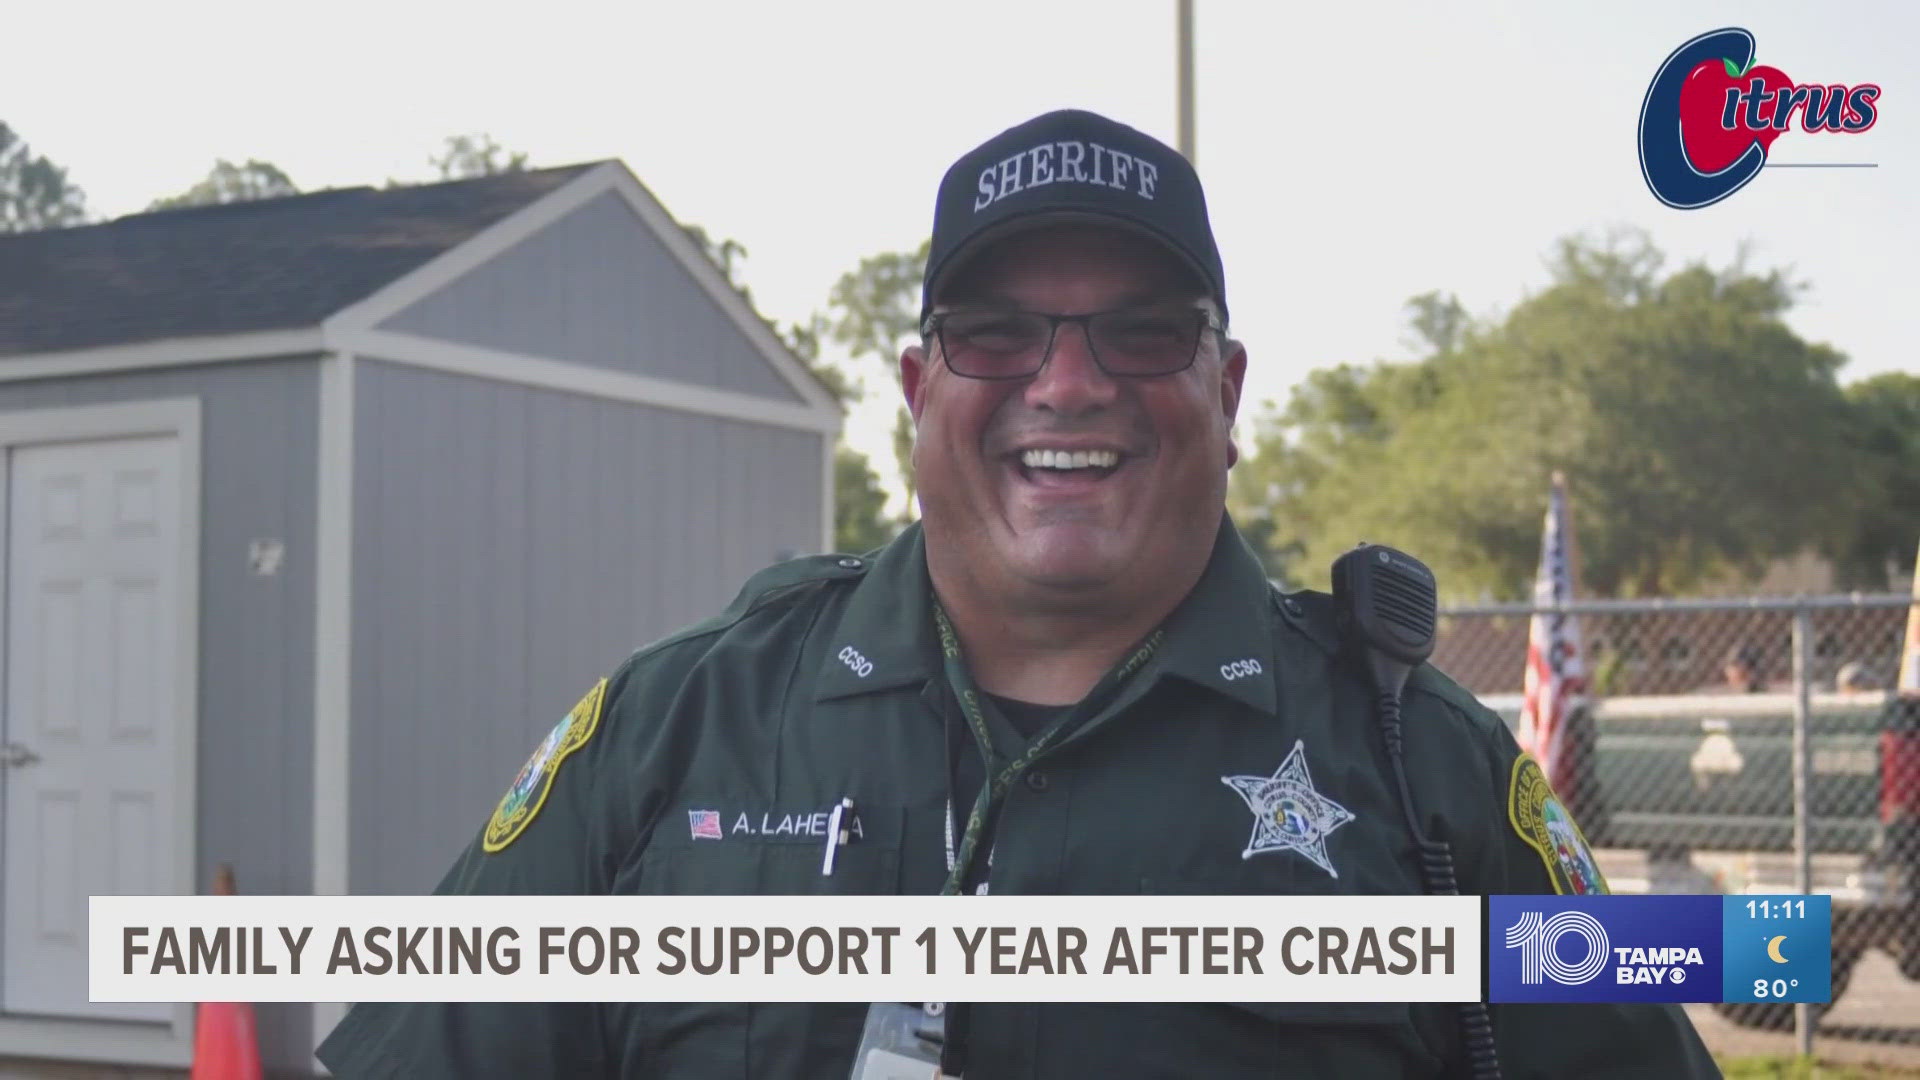 Deputy Lahera was involved in a devastating accident while directing traffic after a high school graduation in May 2023.